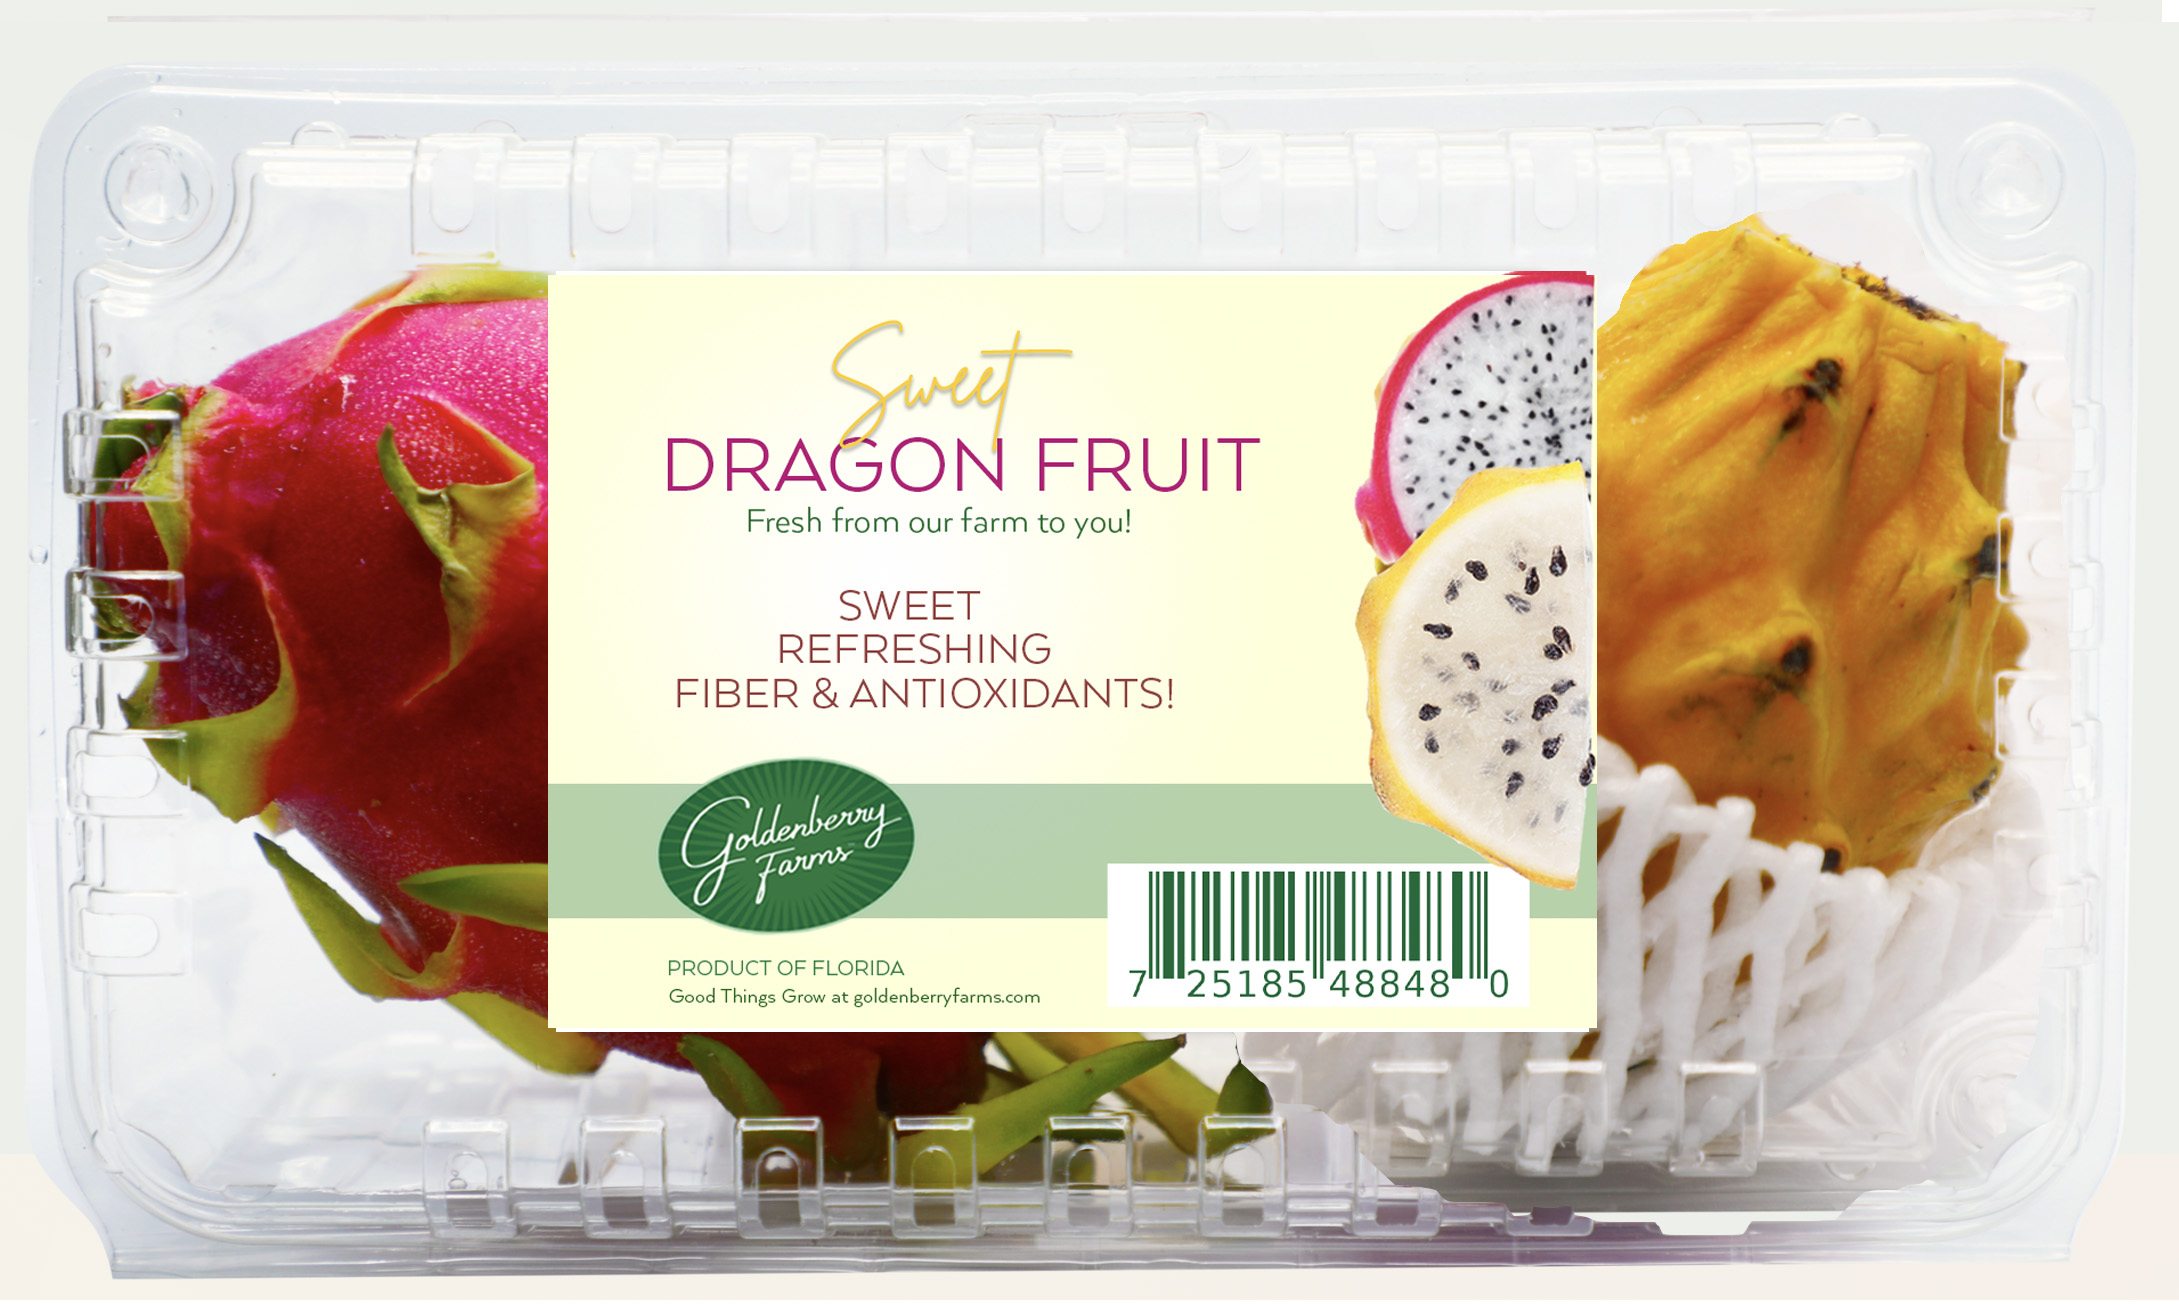 Pitaya - red and yellow dragonfruit grows at Goldenberry Farms Image